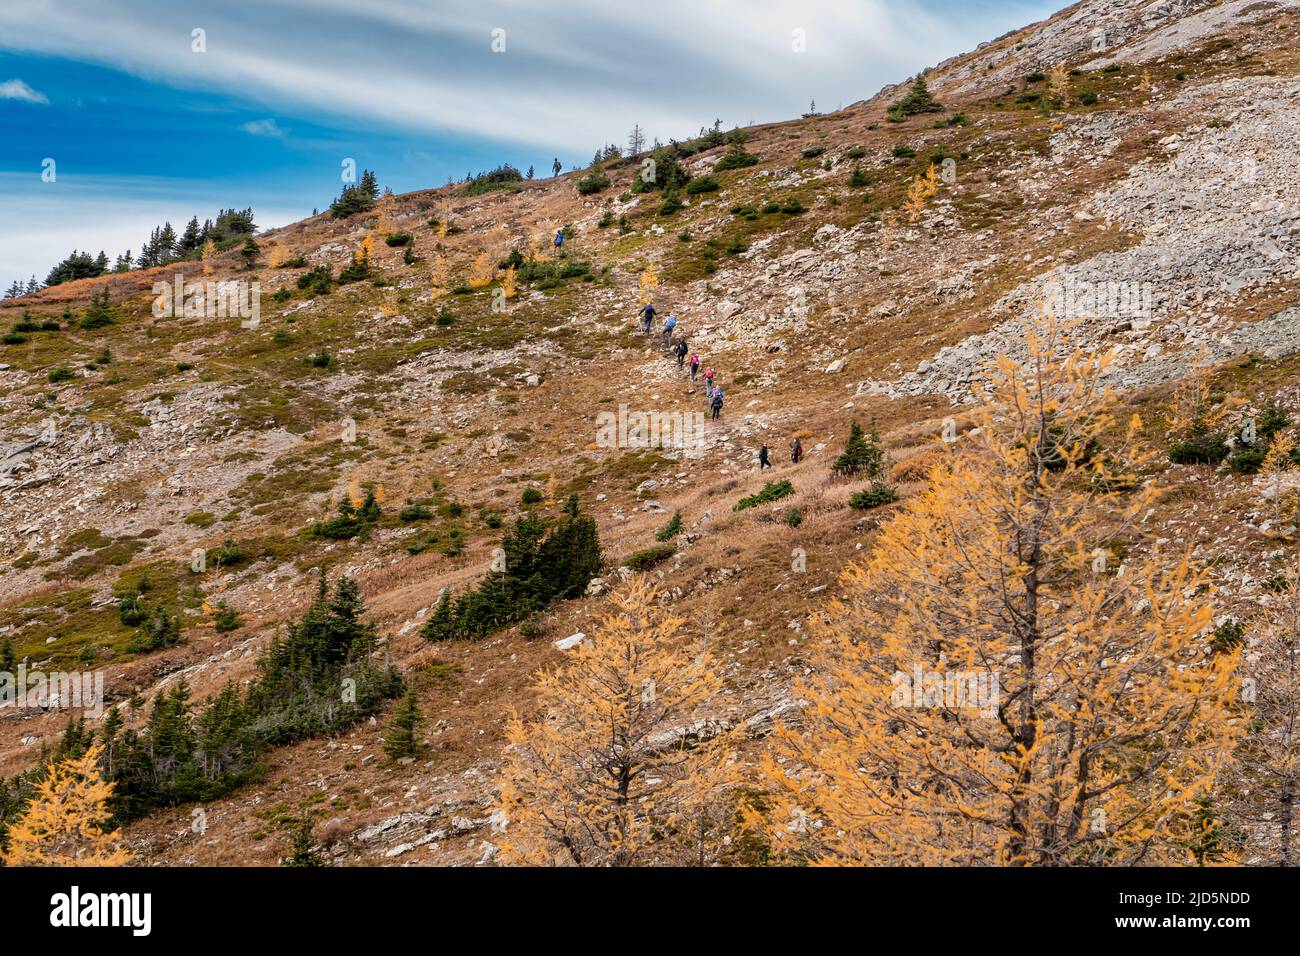 A line of trekkers hiking up a steep trail with autumn larch trees near Ptarmigan Cirque in Kananaskis Alberta Canada. Stock Photo